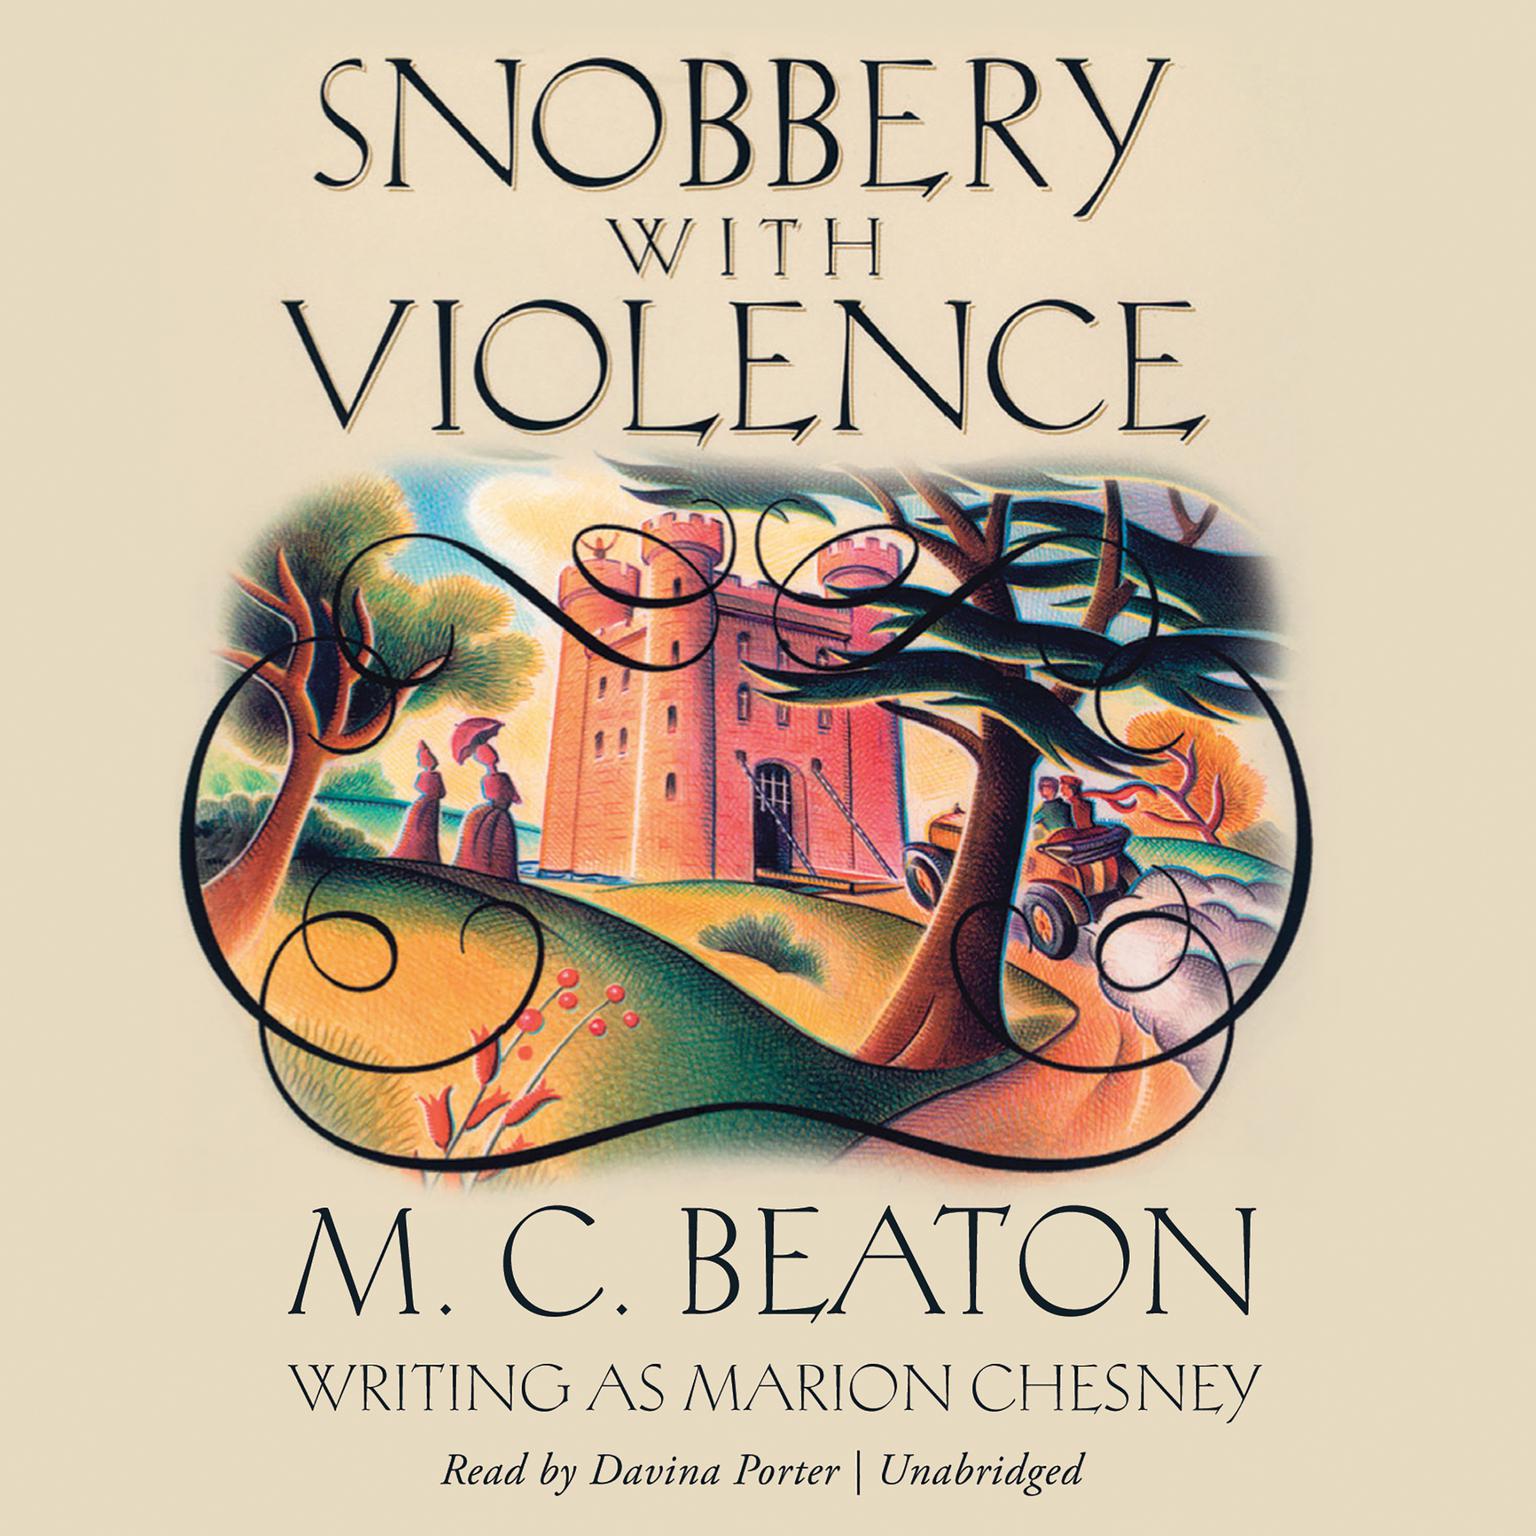 Snobbery with Violence Audiobook, by M. C. Beaton